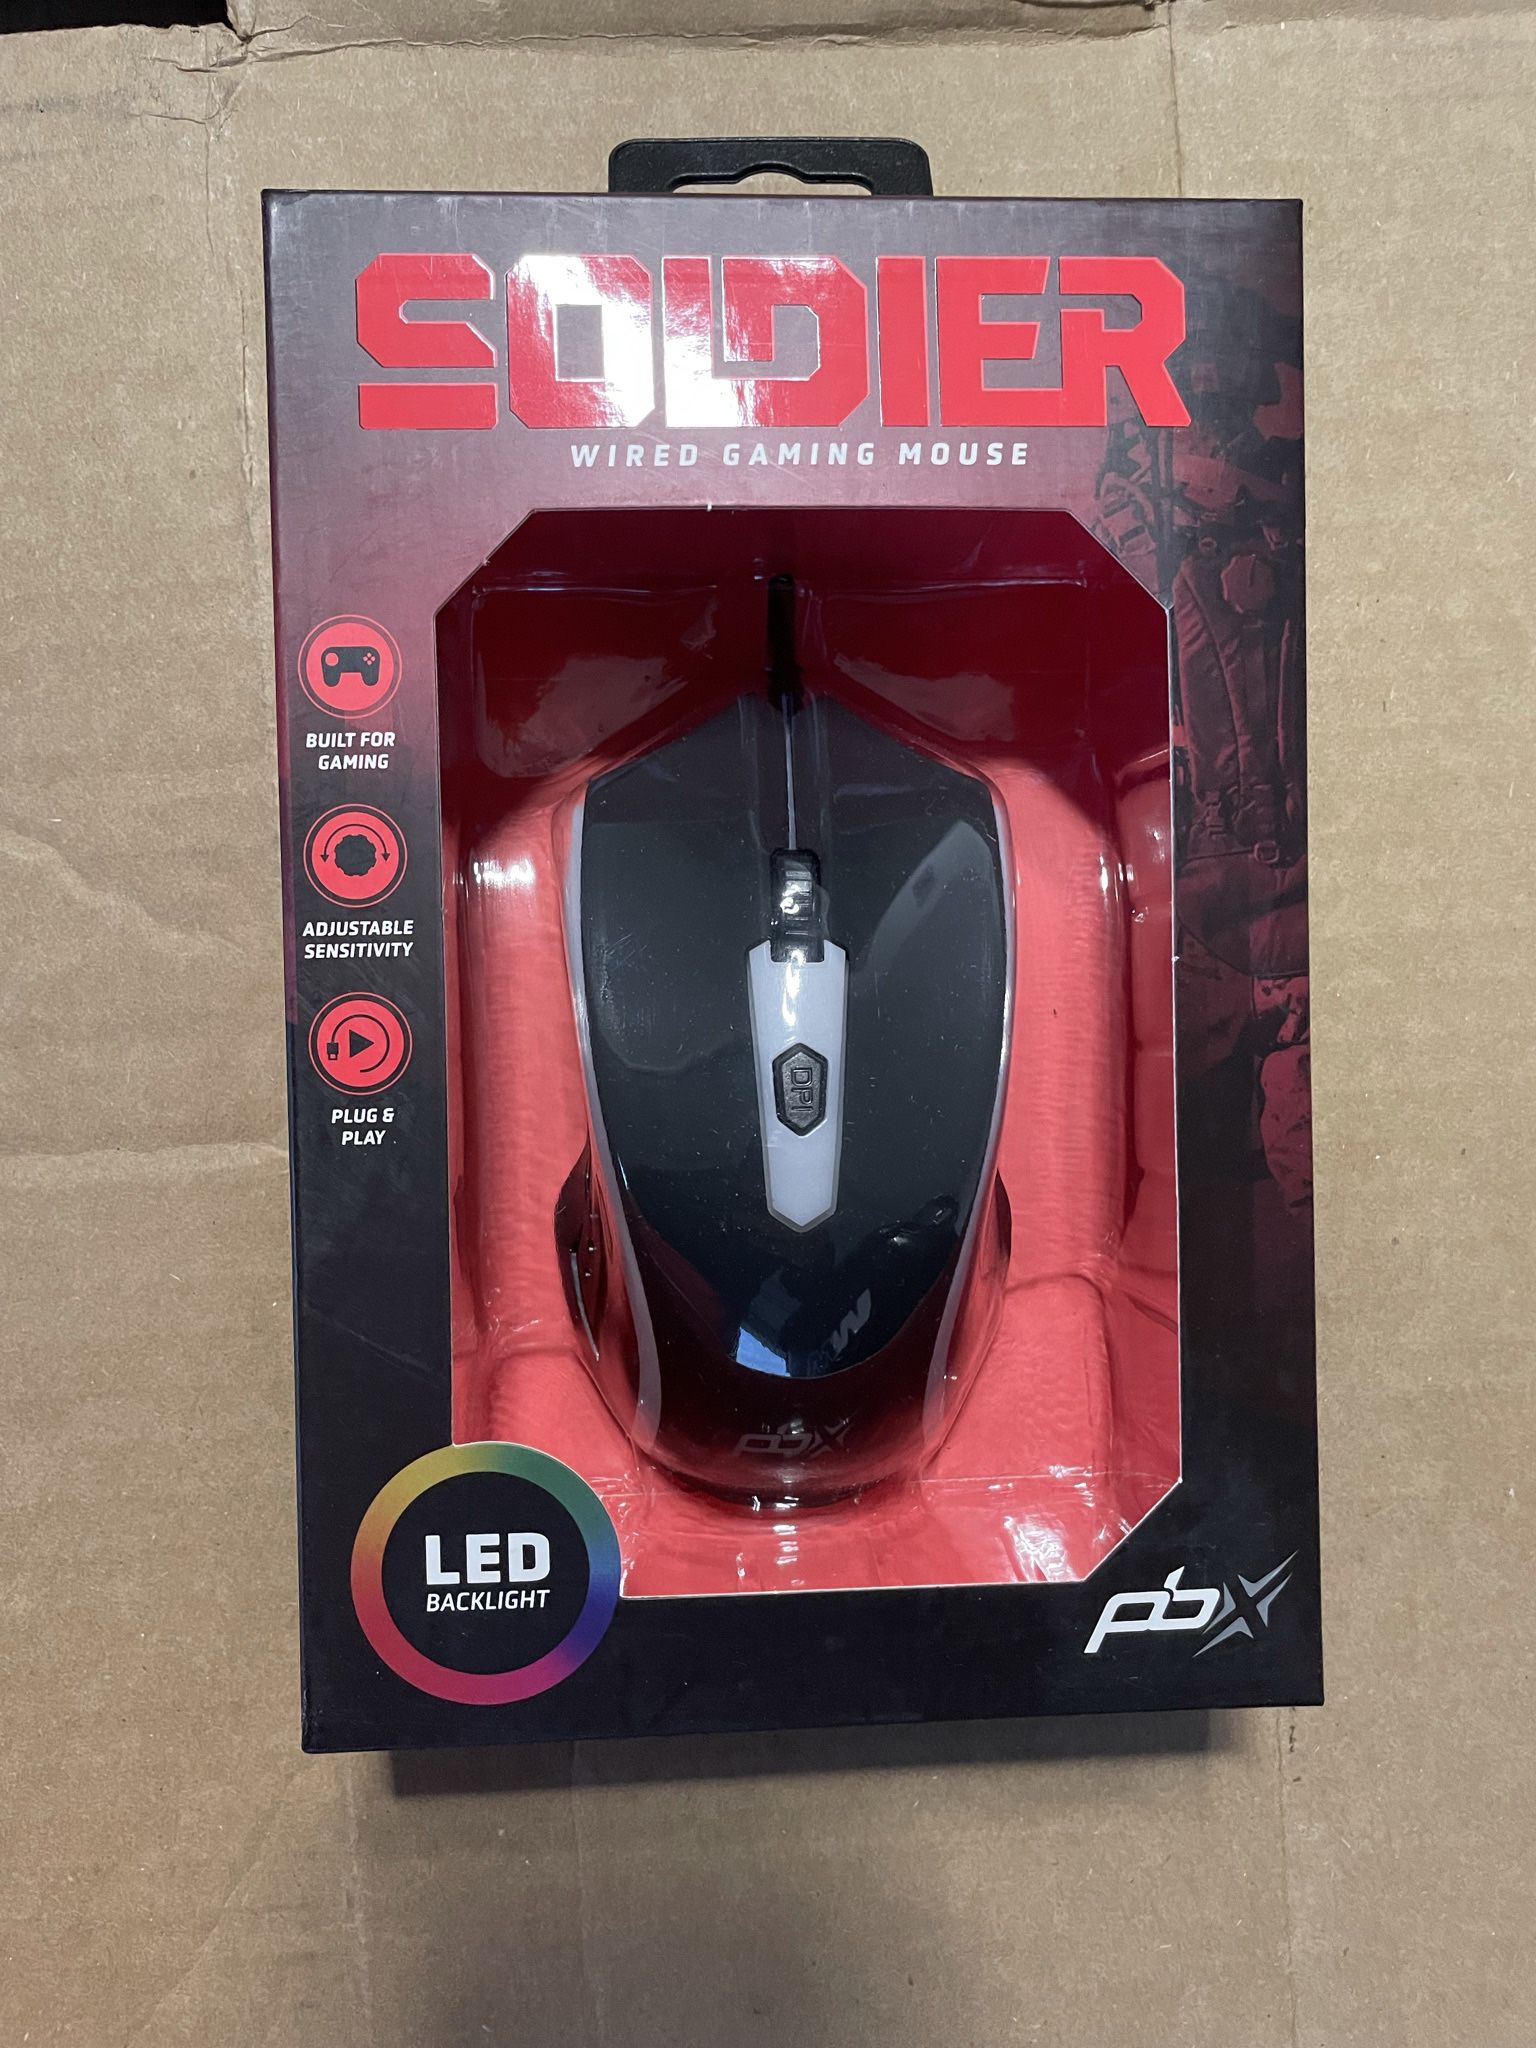 PBX “Soldier” Wired Gaming Mouse